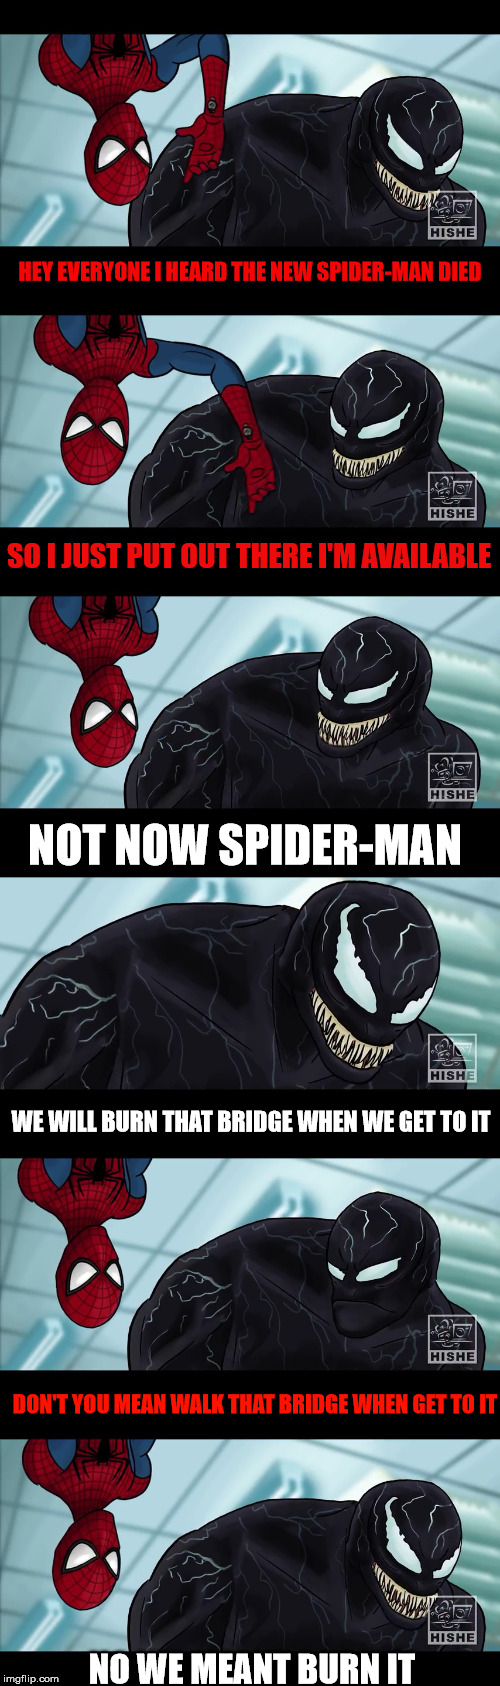 Spider-Man And Venom Meme | HEY EVERYONE I HEARD THE NEW SPIDER-MAN DIED; SO I JUST PUT OUT THERE I'M AVAILABLE; NOT NOW SPIDER-MAN; WE WILL BURN THAT BRIDGE WHEN WE GET TO IT; DON'T YOU MEAN WALK THAT BRIDGE WHEN GET TO IT; NO WE MEANT BURN IT | image tagged in spiderman,venom,hishe,memes,marvel,funny | made w/ Imgflip meme maker